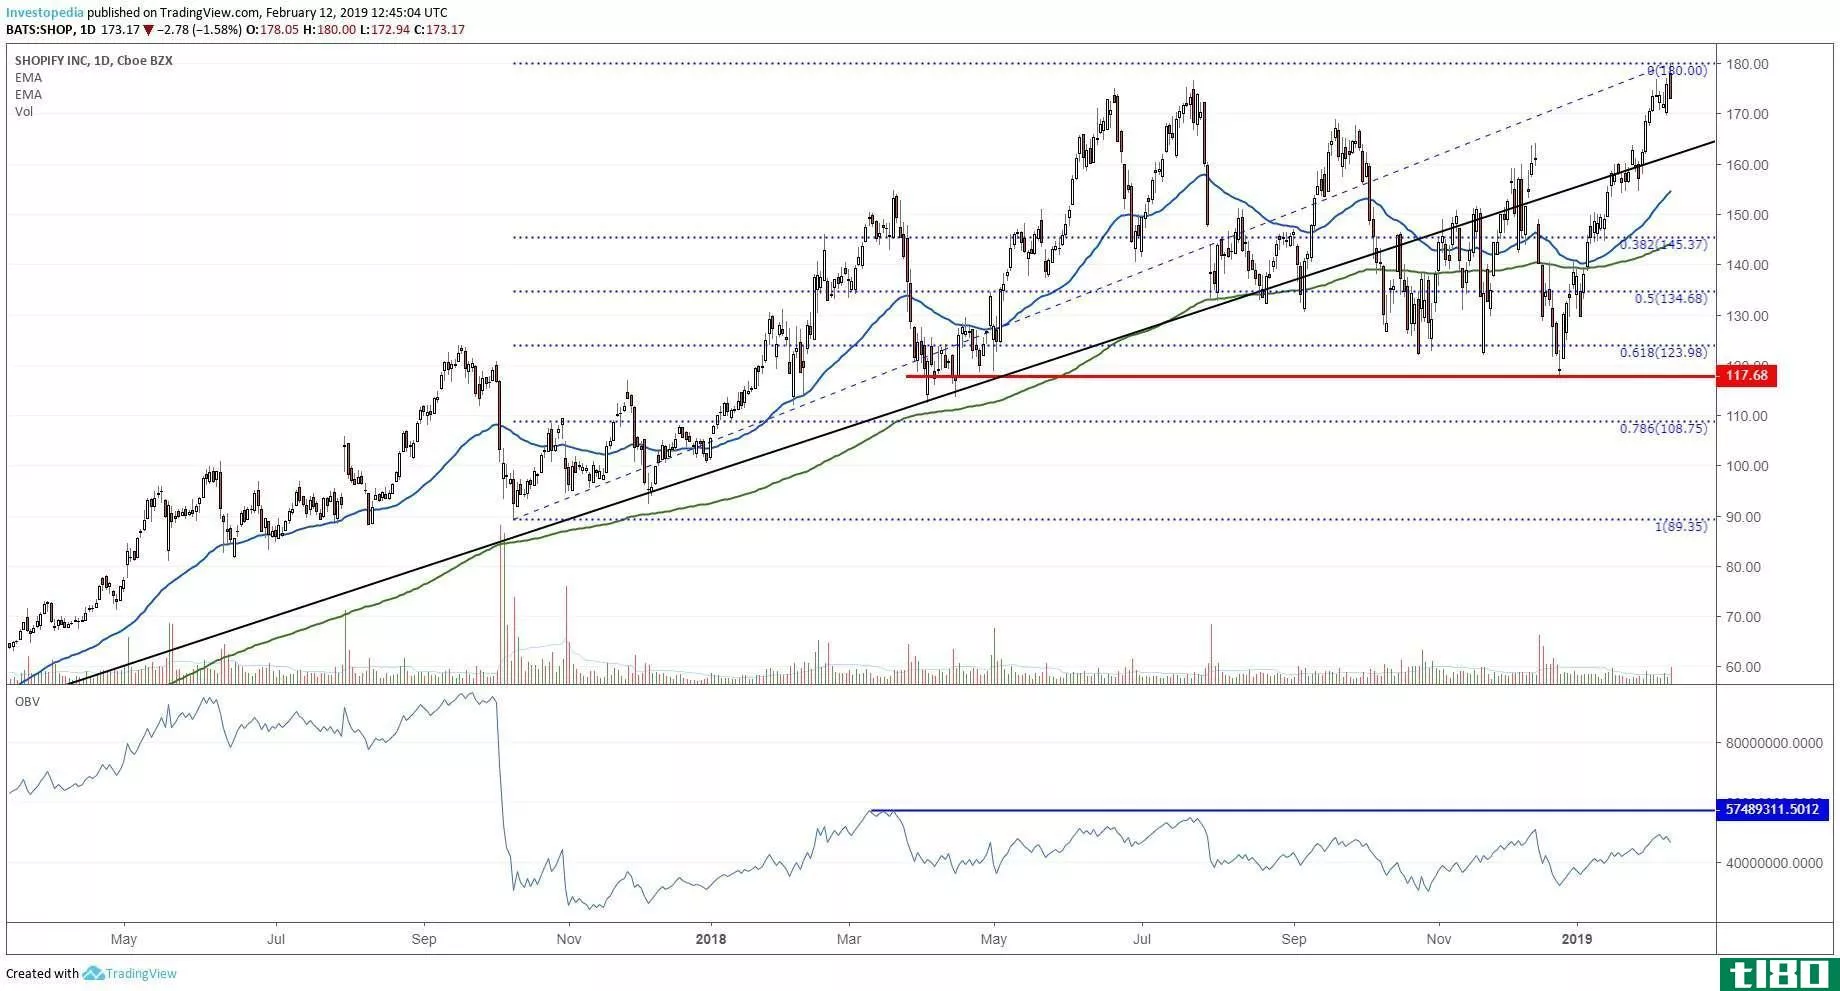 Daily technical chart showing the share price performance of Shopify Inc. (SHOP)